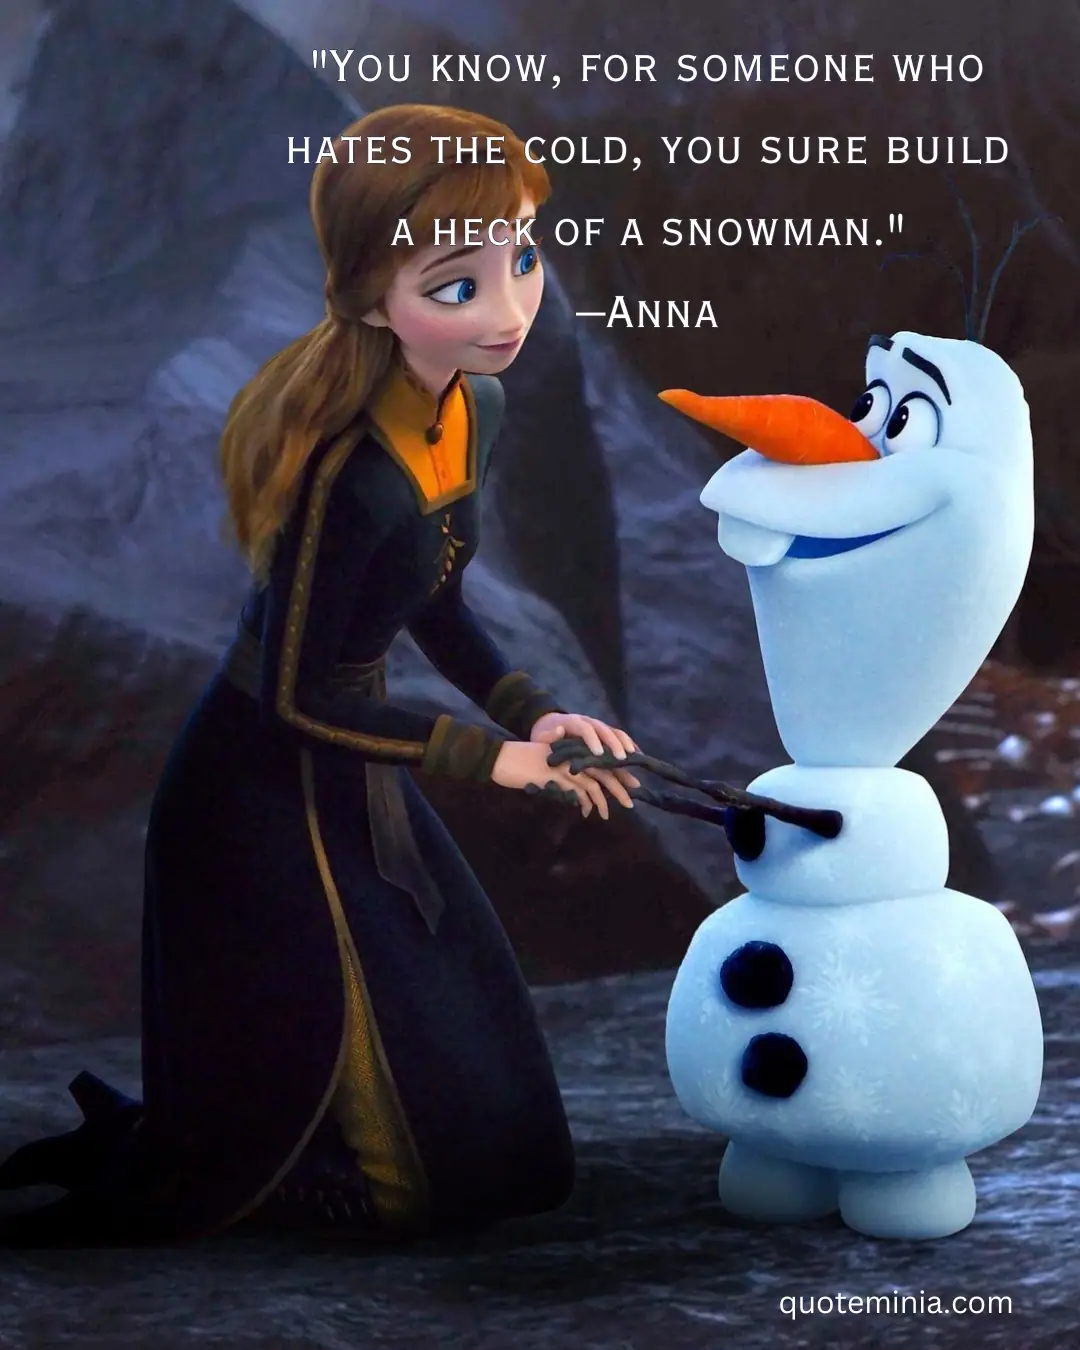 Quotes From Frozen 2